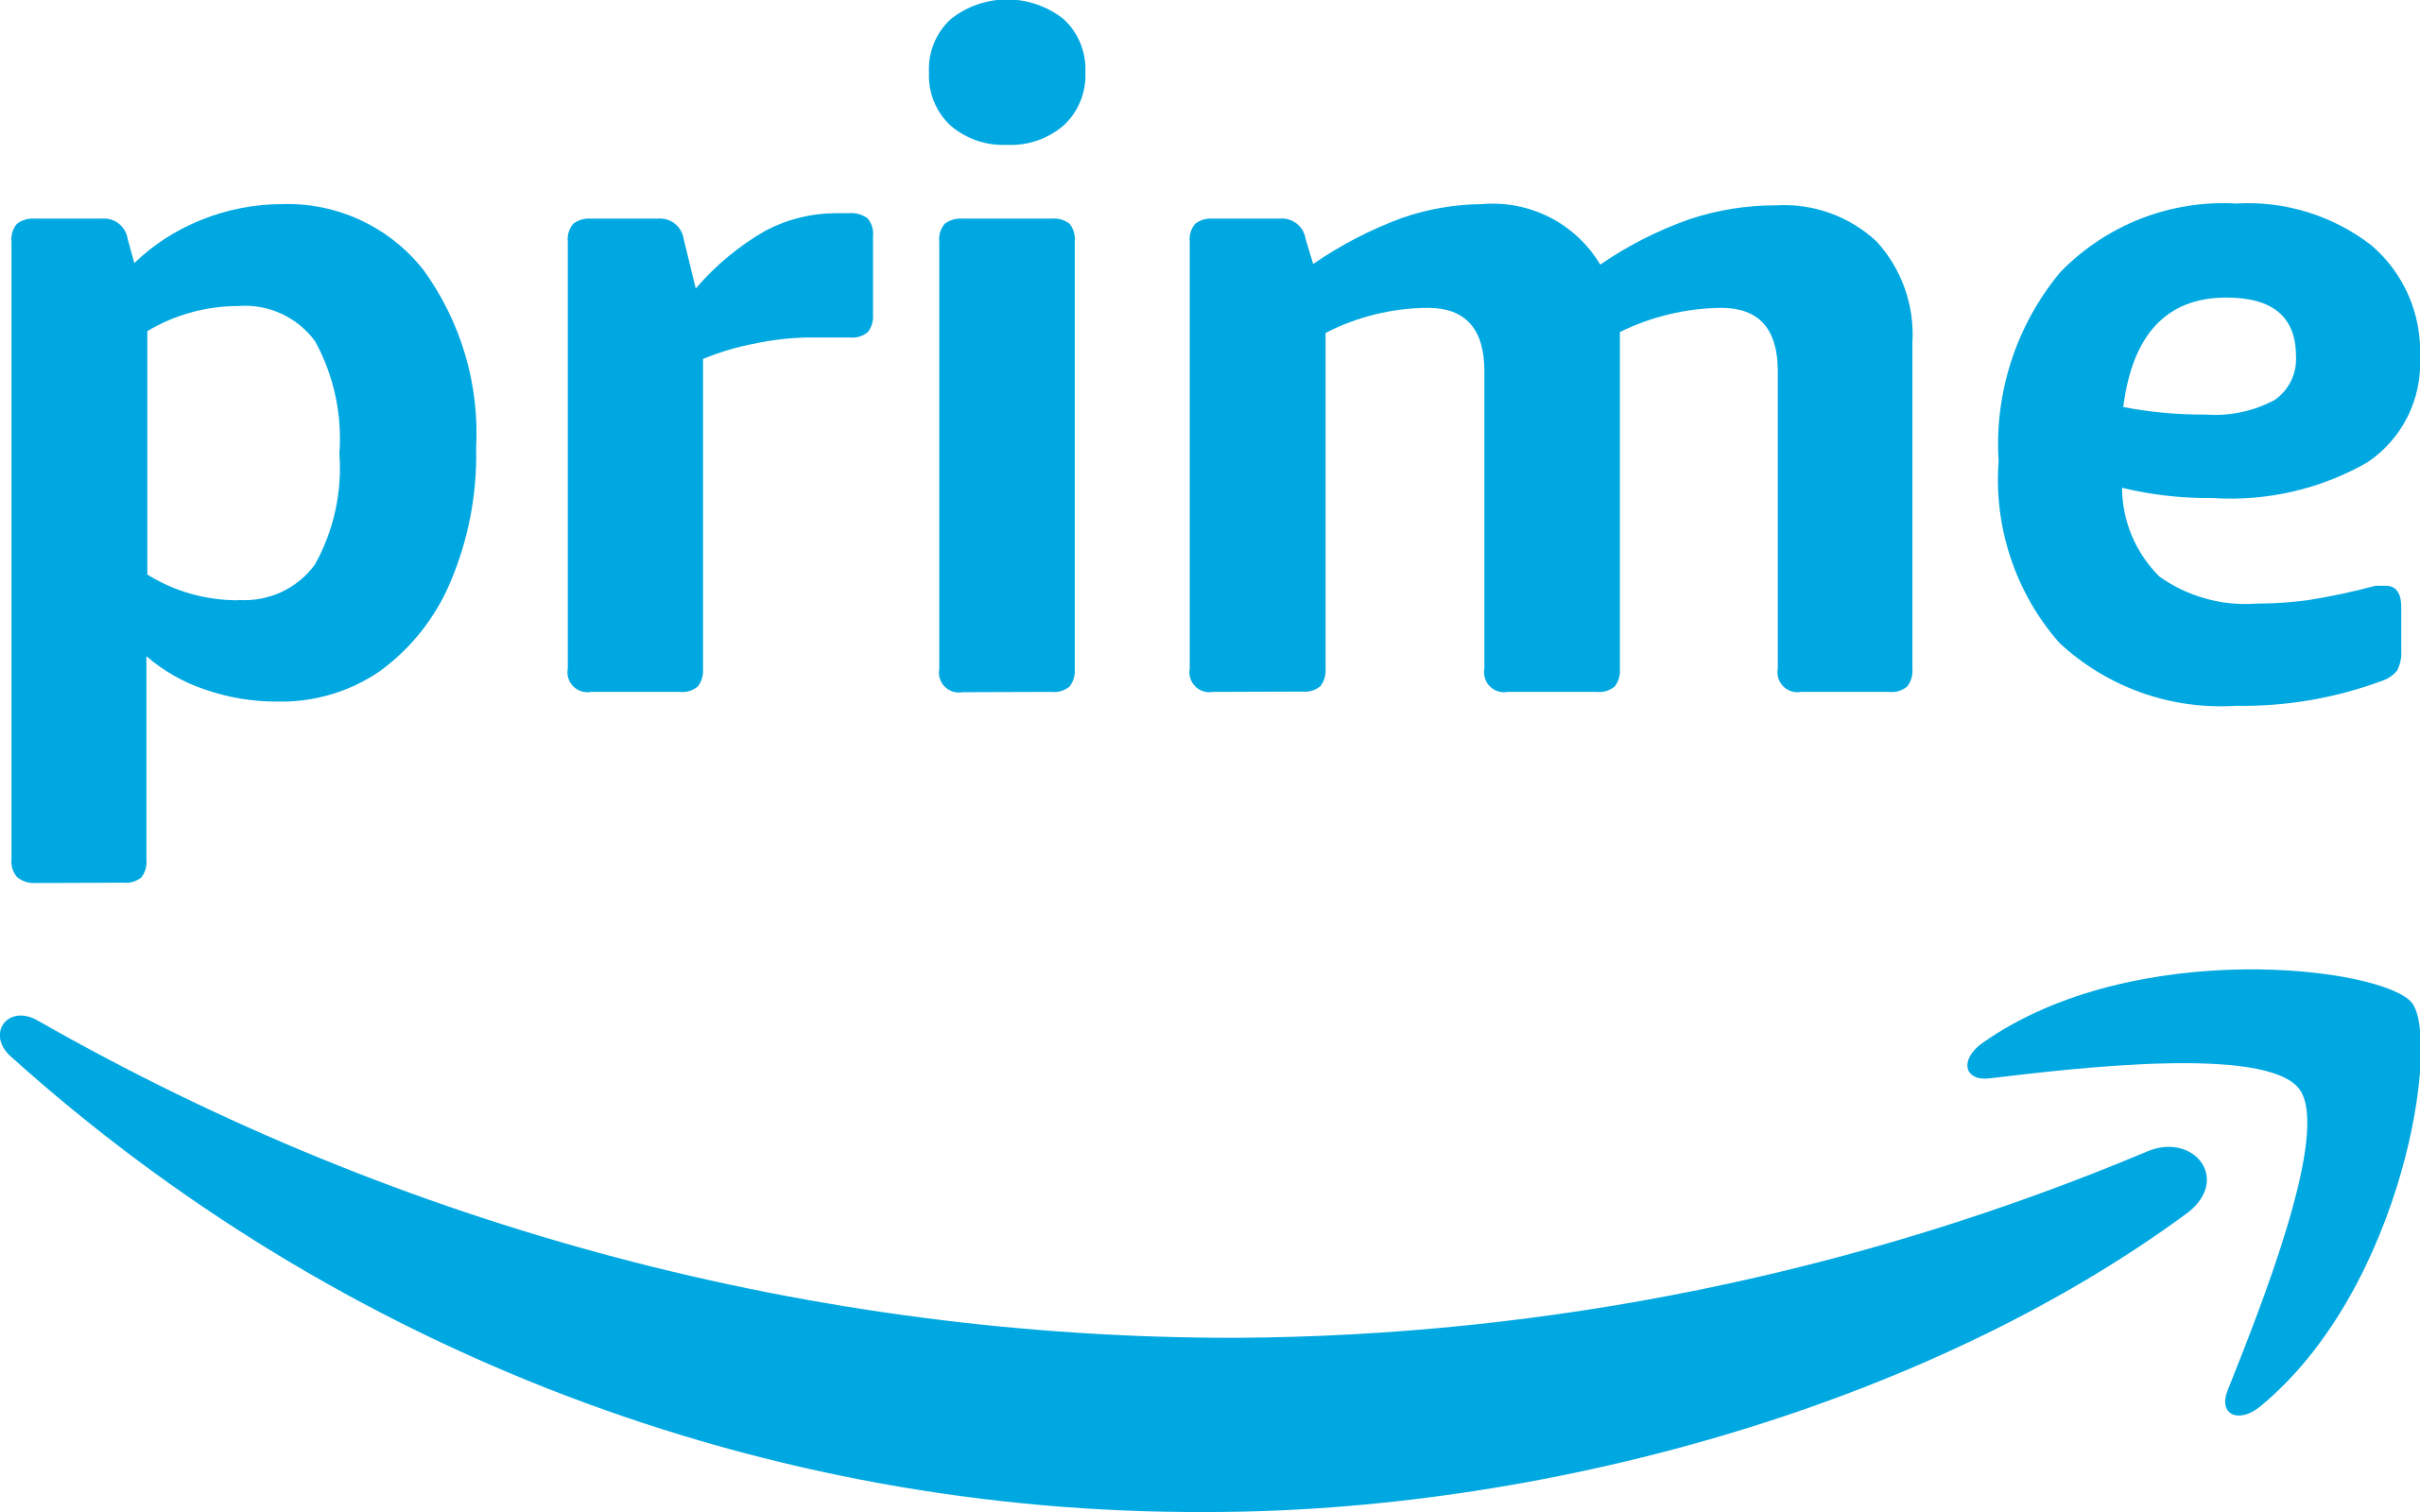 Earn $5 back on your Amazon Prime purchase, when you spend $14.99 or more